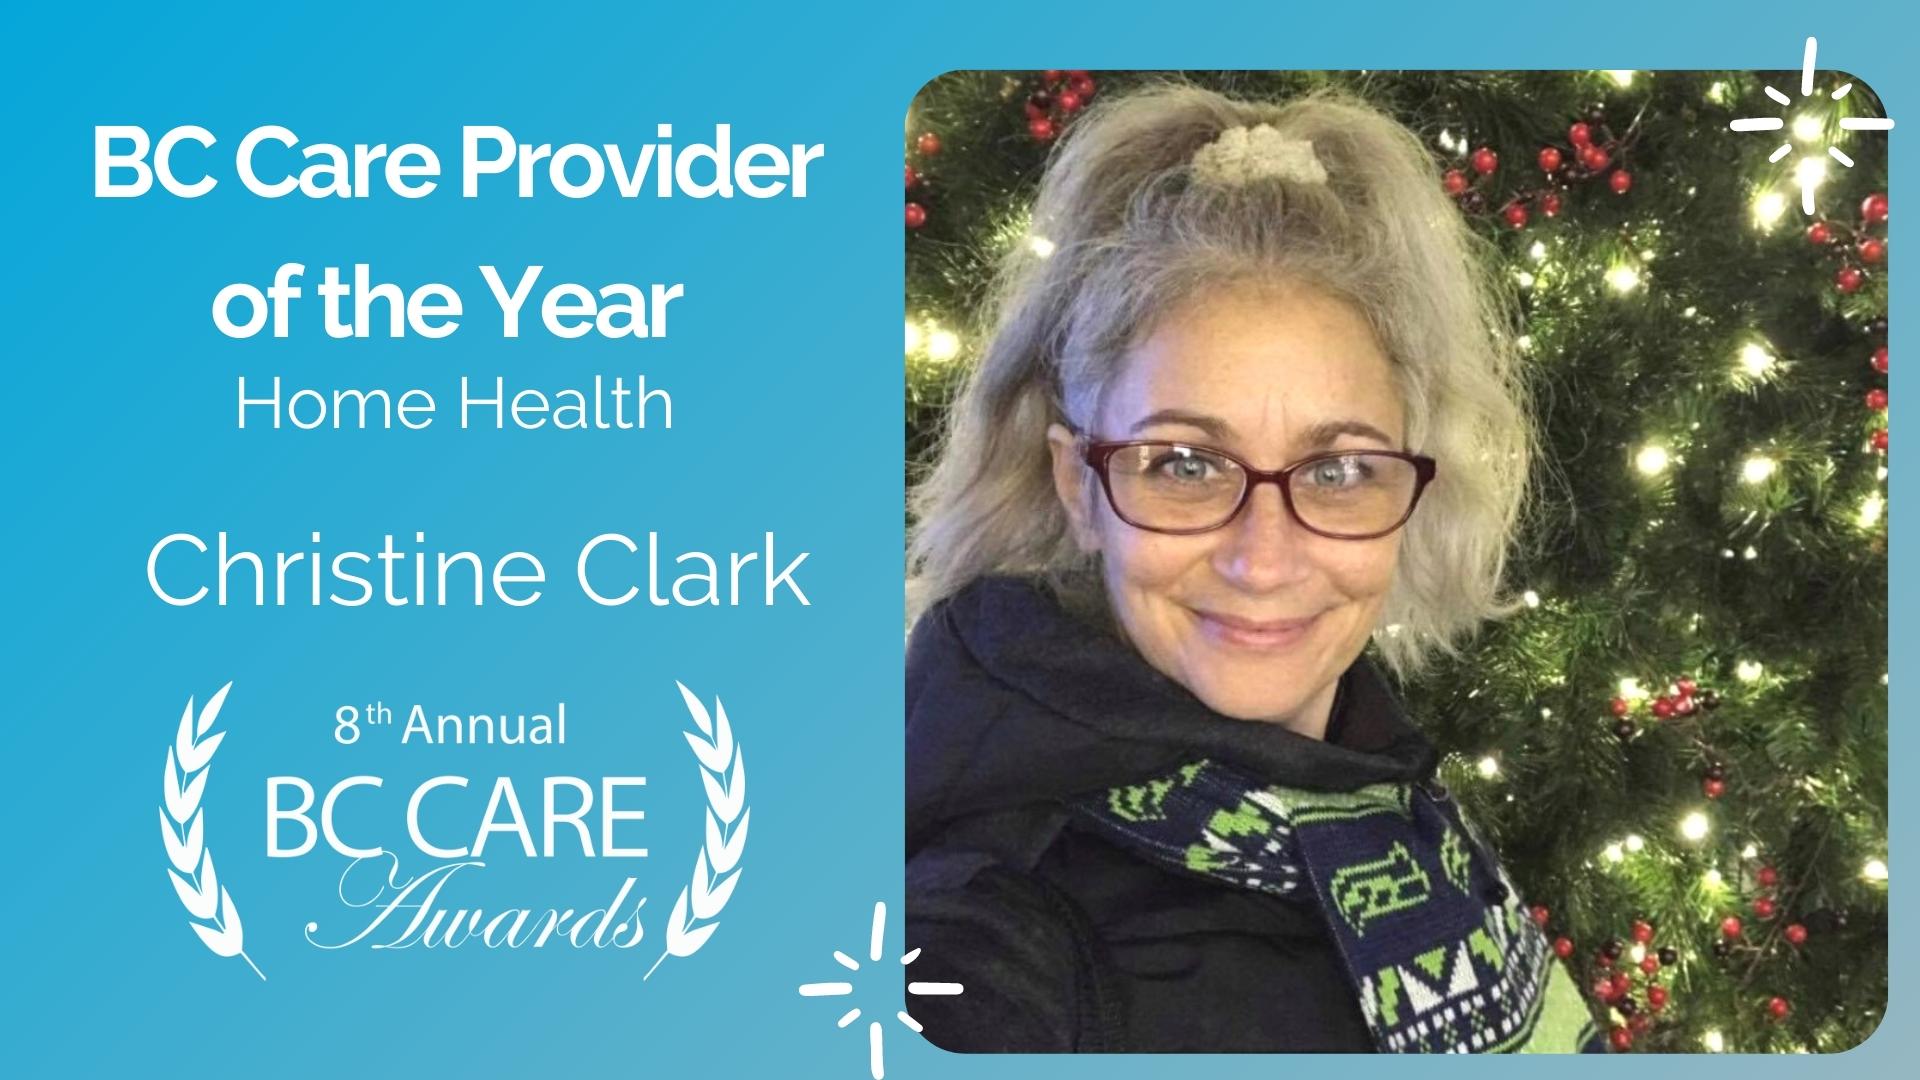 Congratulations, Christine Clark! Winner of the BC Care Provider of the Year award (Home Health category)